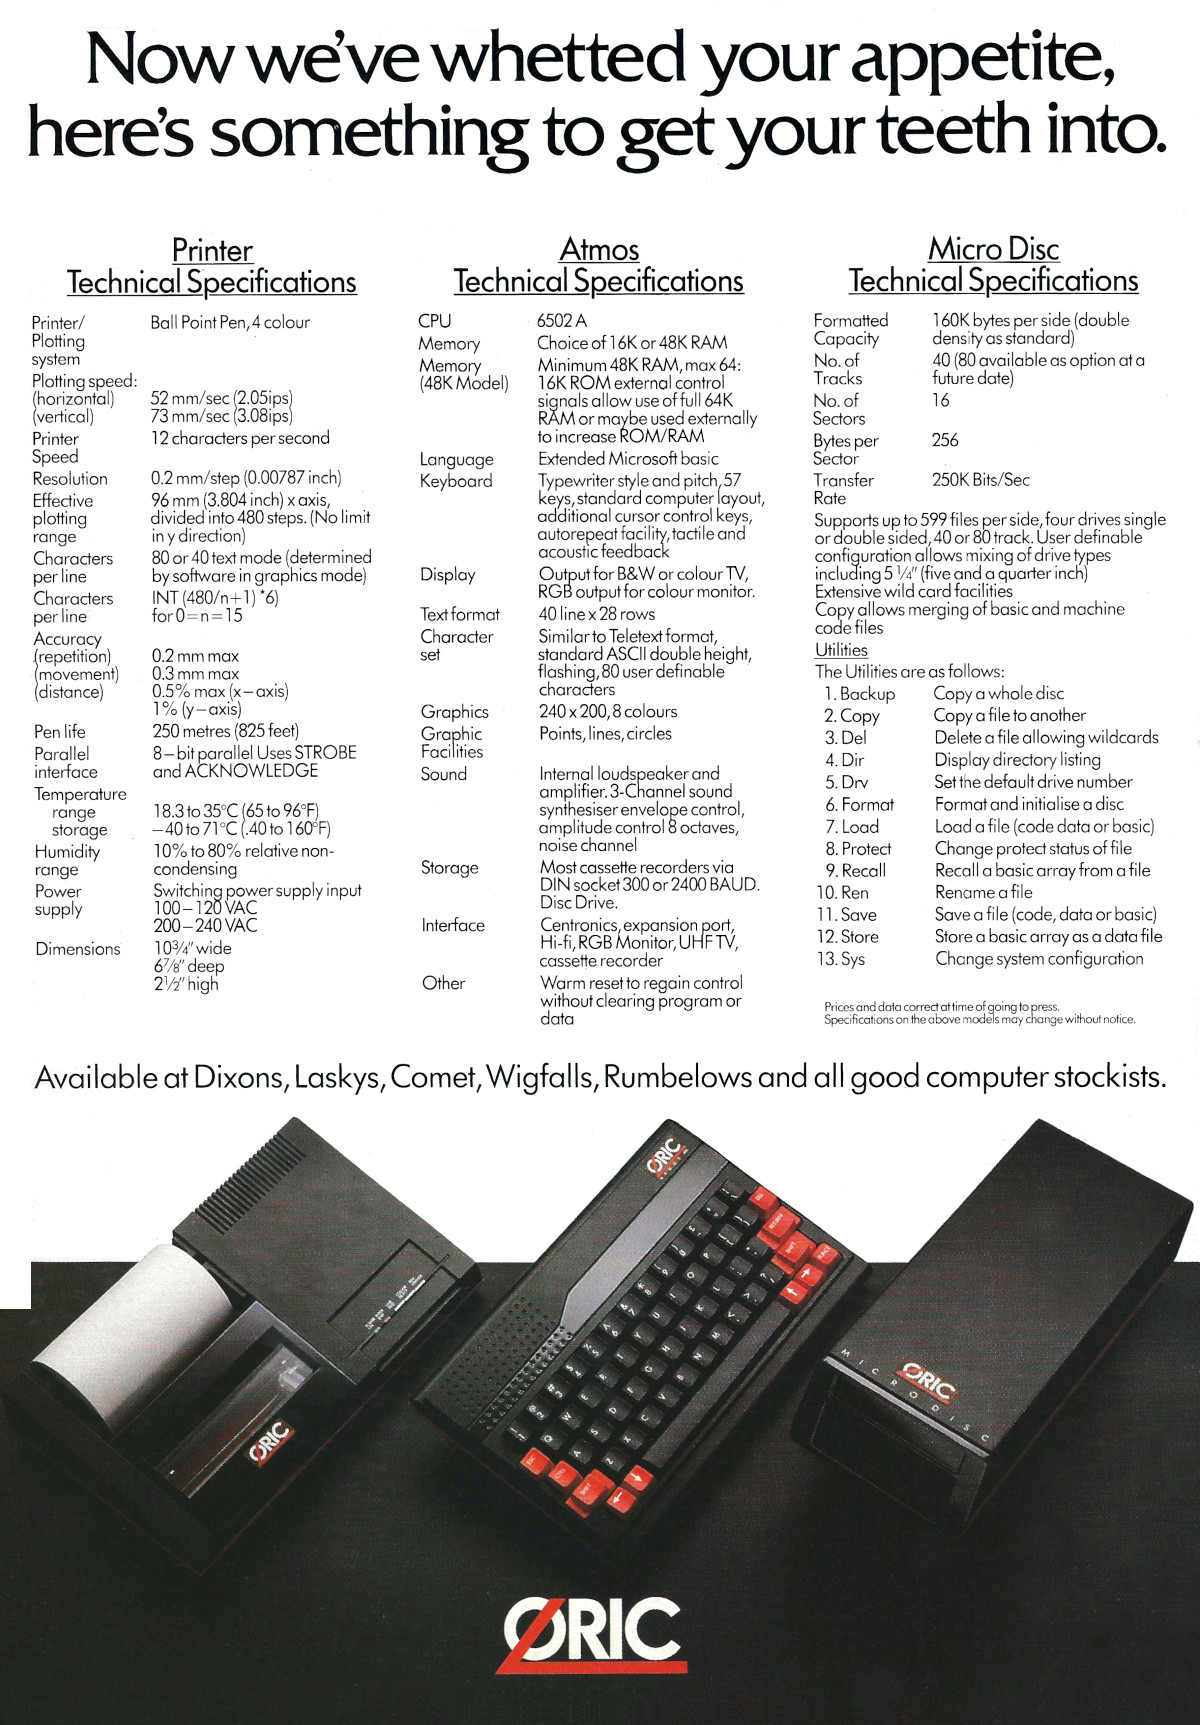 A supplement to this advert showing Oric's printer and floppy disk unit. From Personal Computer World, March 1984